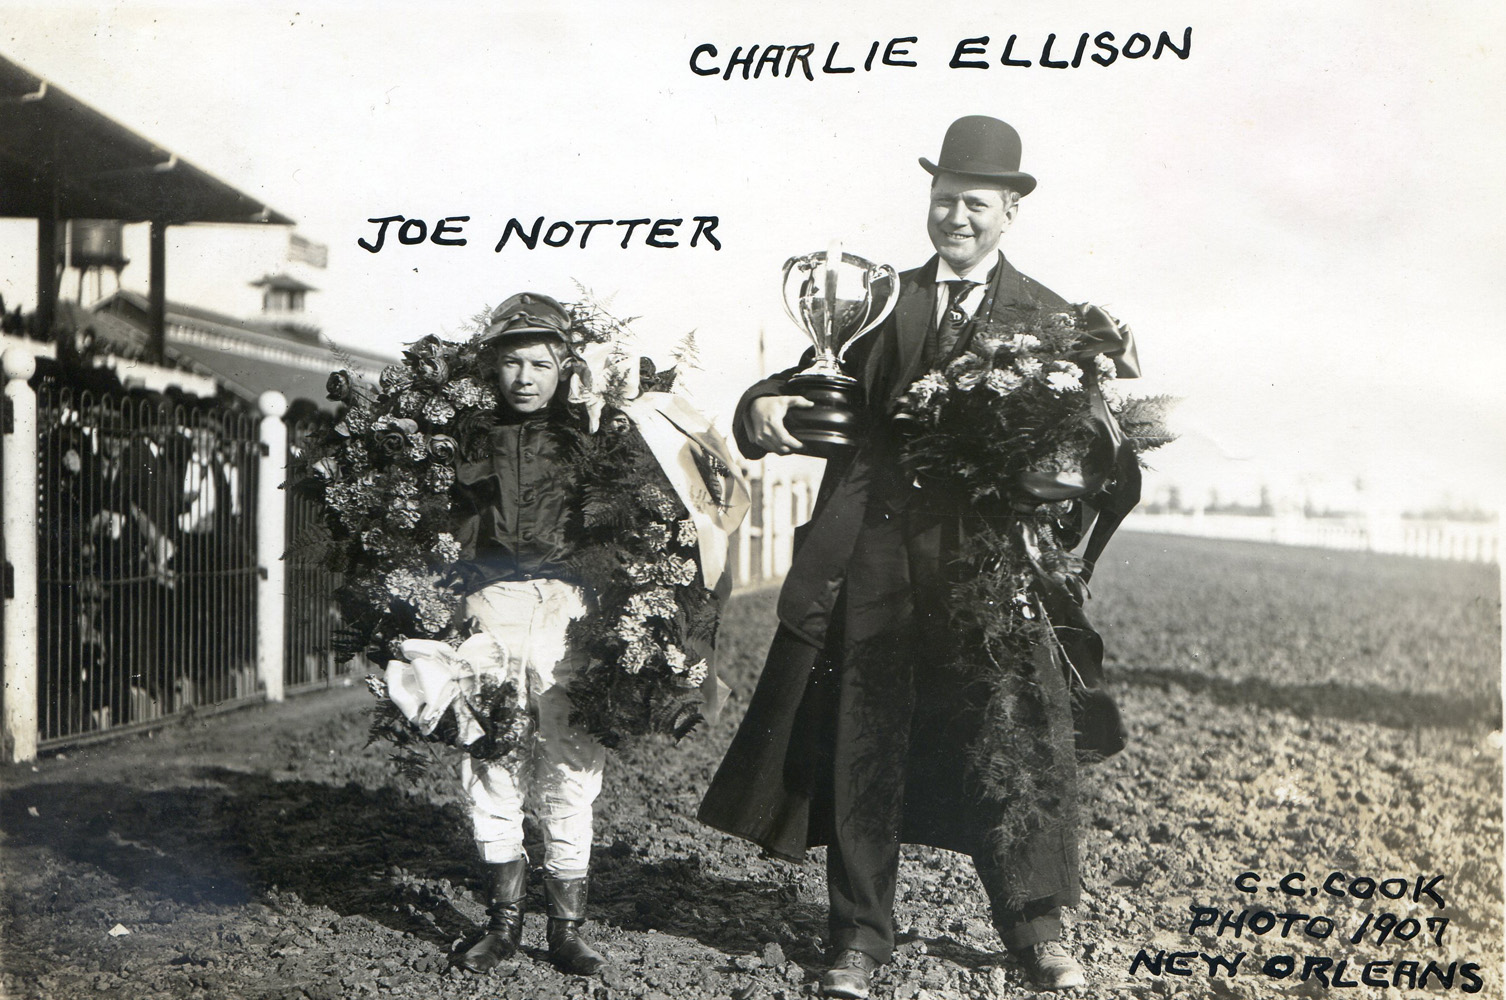 Joe Notter and Charlie Ellison after winning a race in New Orleans in 1907 (C. C. Cook/Museum Collection)